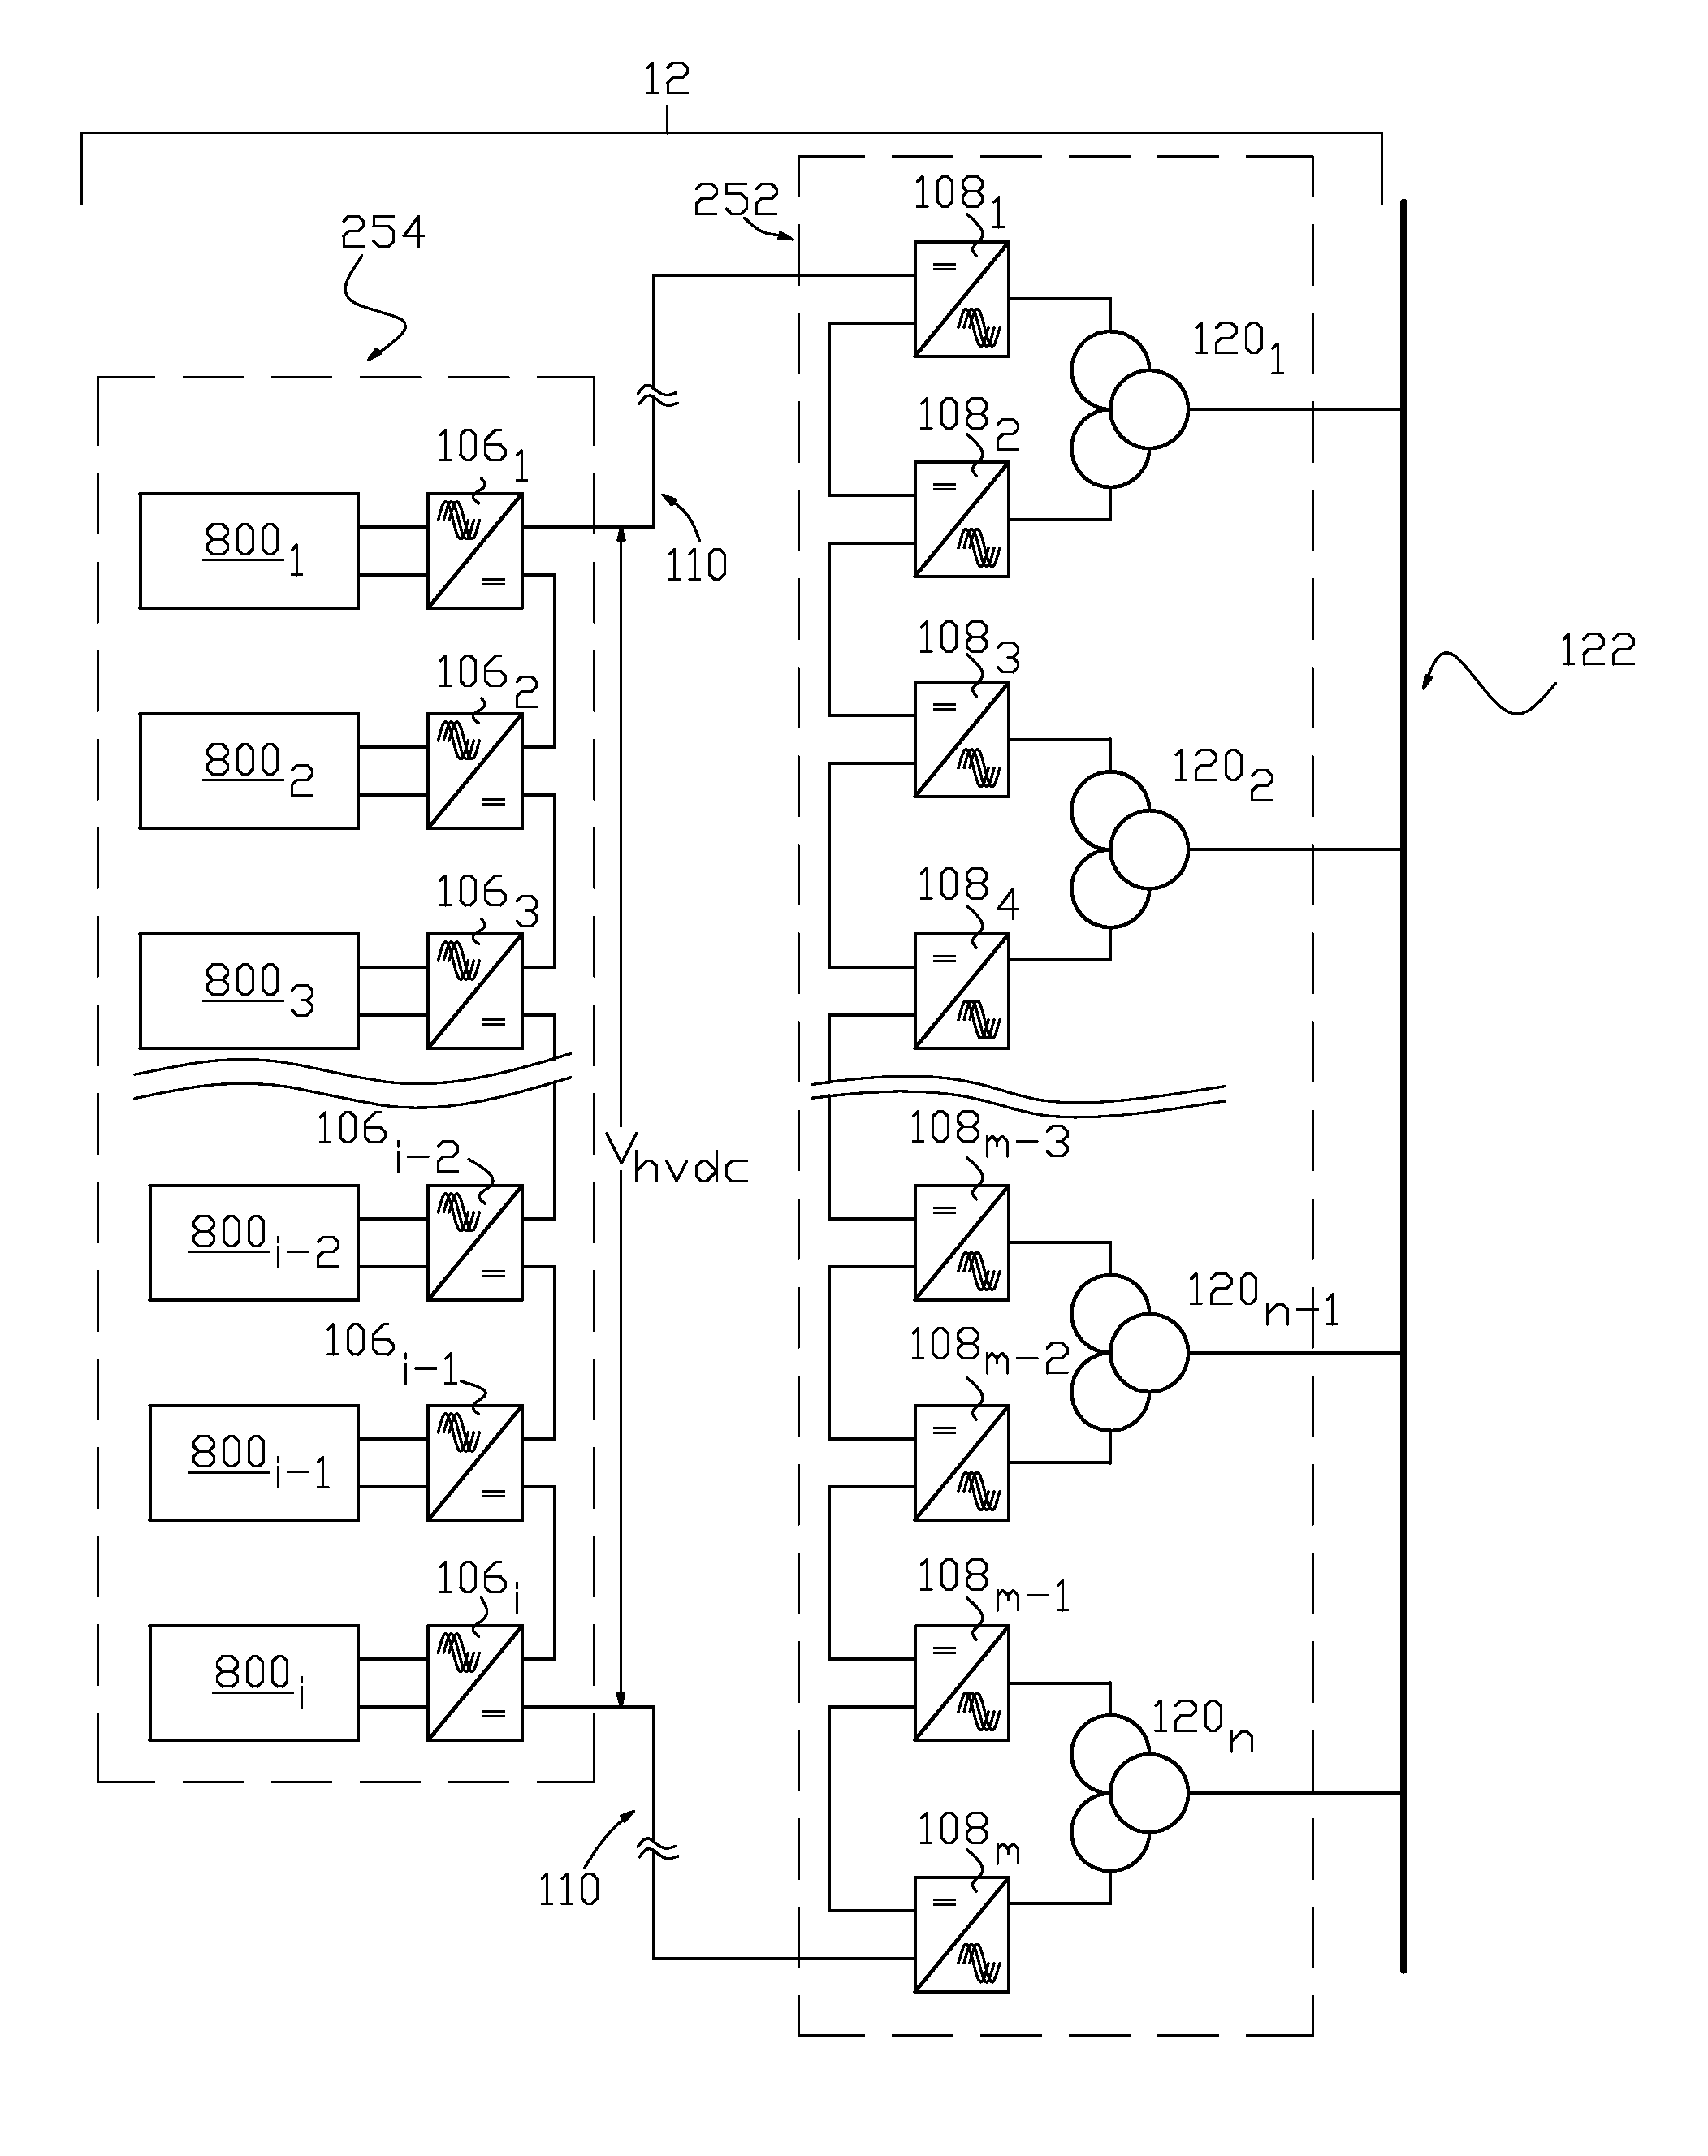 Collection of electric power from renewable energy sources via high voltage, direct current systems with conversion and supply to an alternating current transmission network